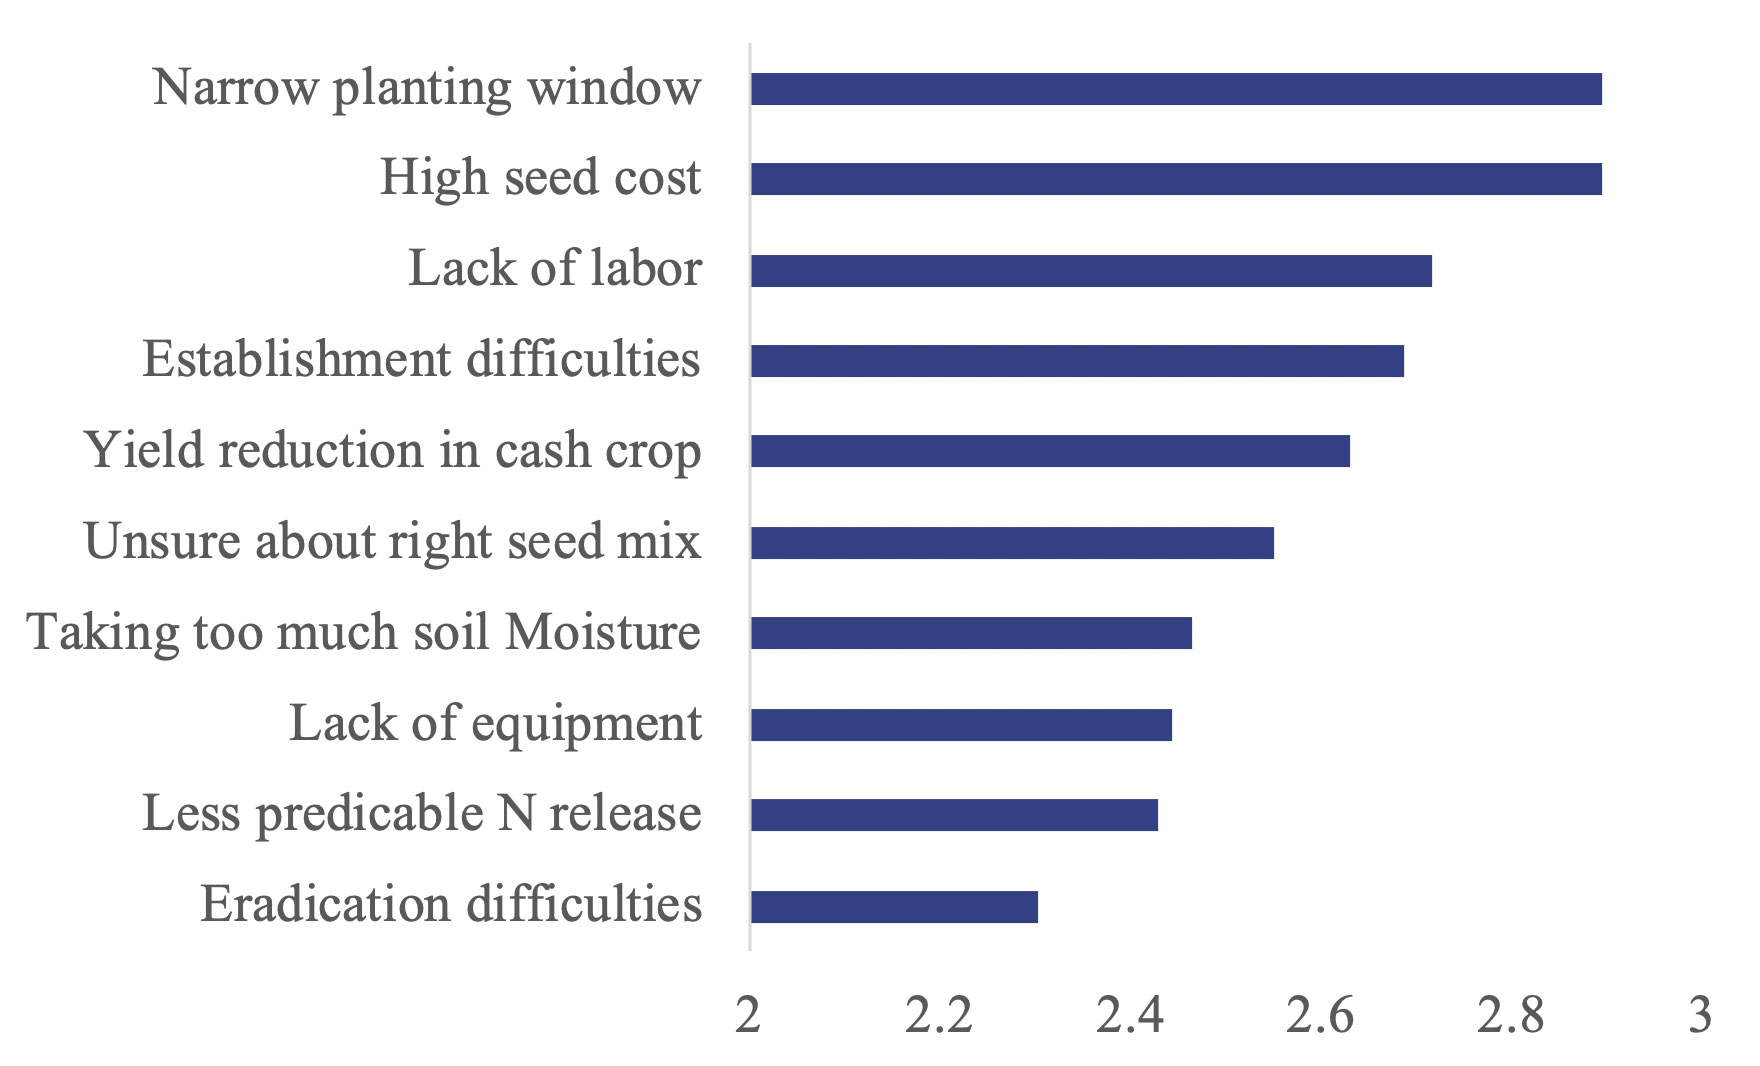 A bar graph displaying cover crop challenges as ranked by farmers. Values are: narrow planting window 2.8, high seed cost 2.8, lack of labor 2.7, establishment difficulties 2.65, yield reduction in cash crop 2.6, unsure about right seed mix 2.55, taking too much soil moisture 2.45, Less predictable N release 2.4, and eradication difficulties 2.35.